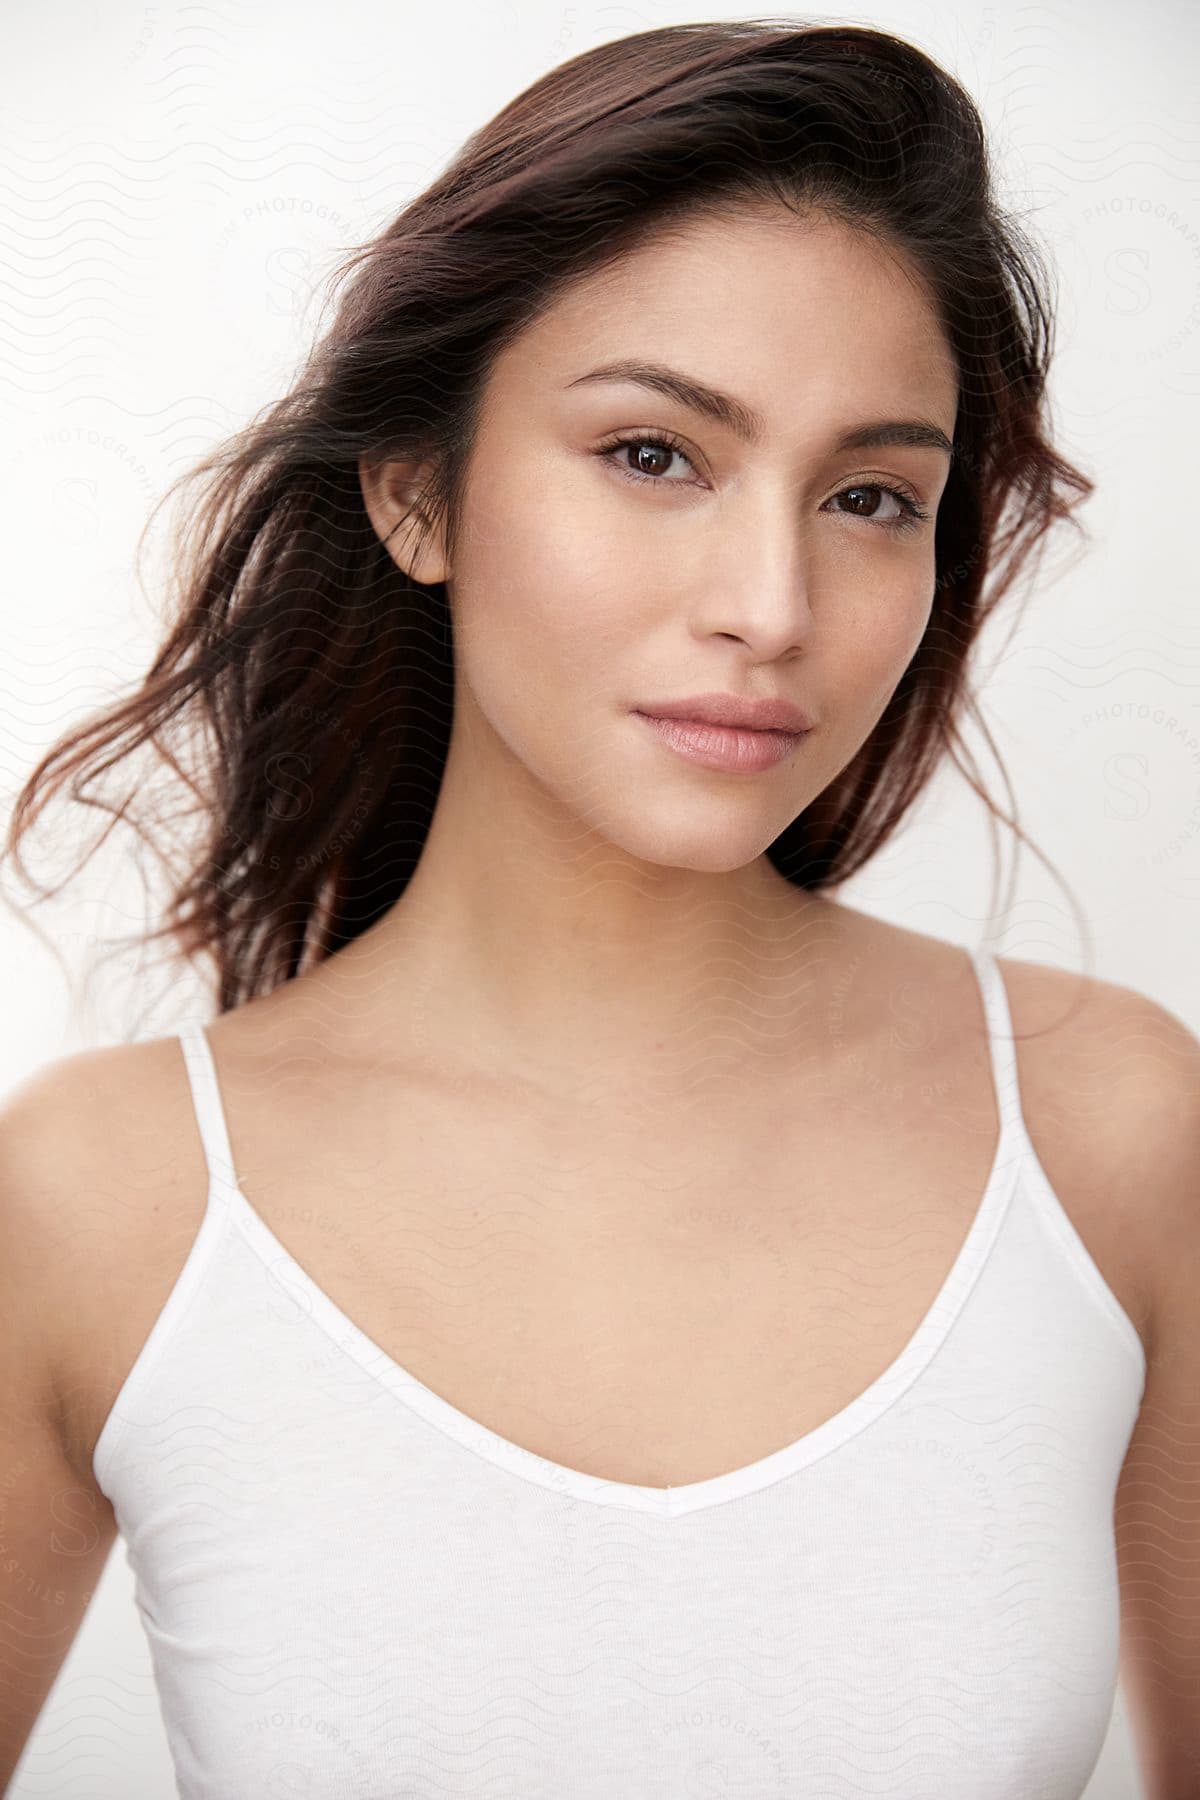 A Latina woman with brown hair and a white tank top stands against a white background